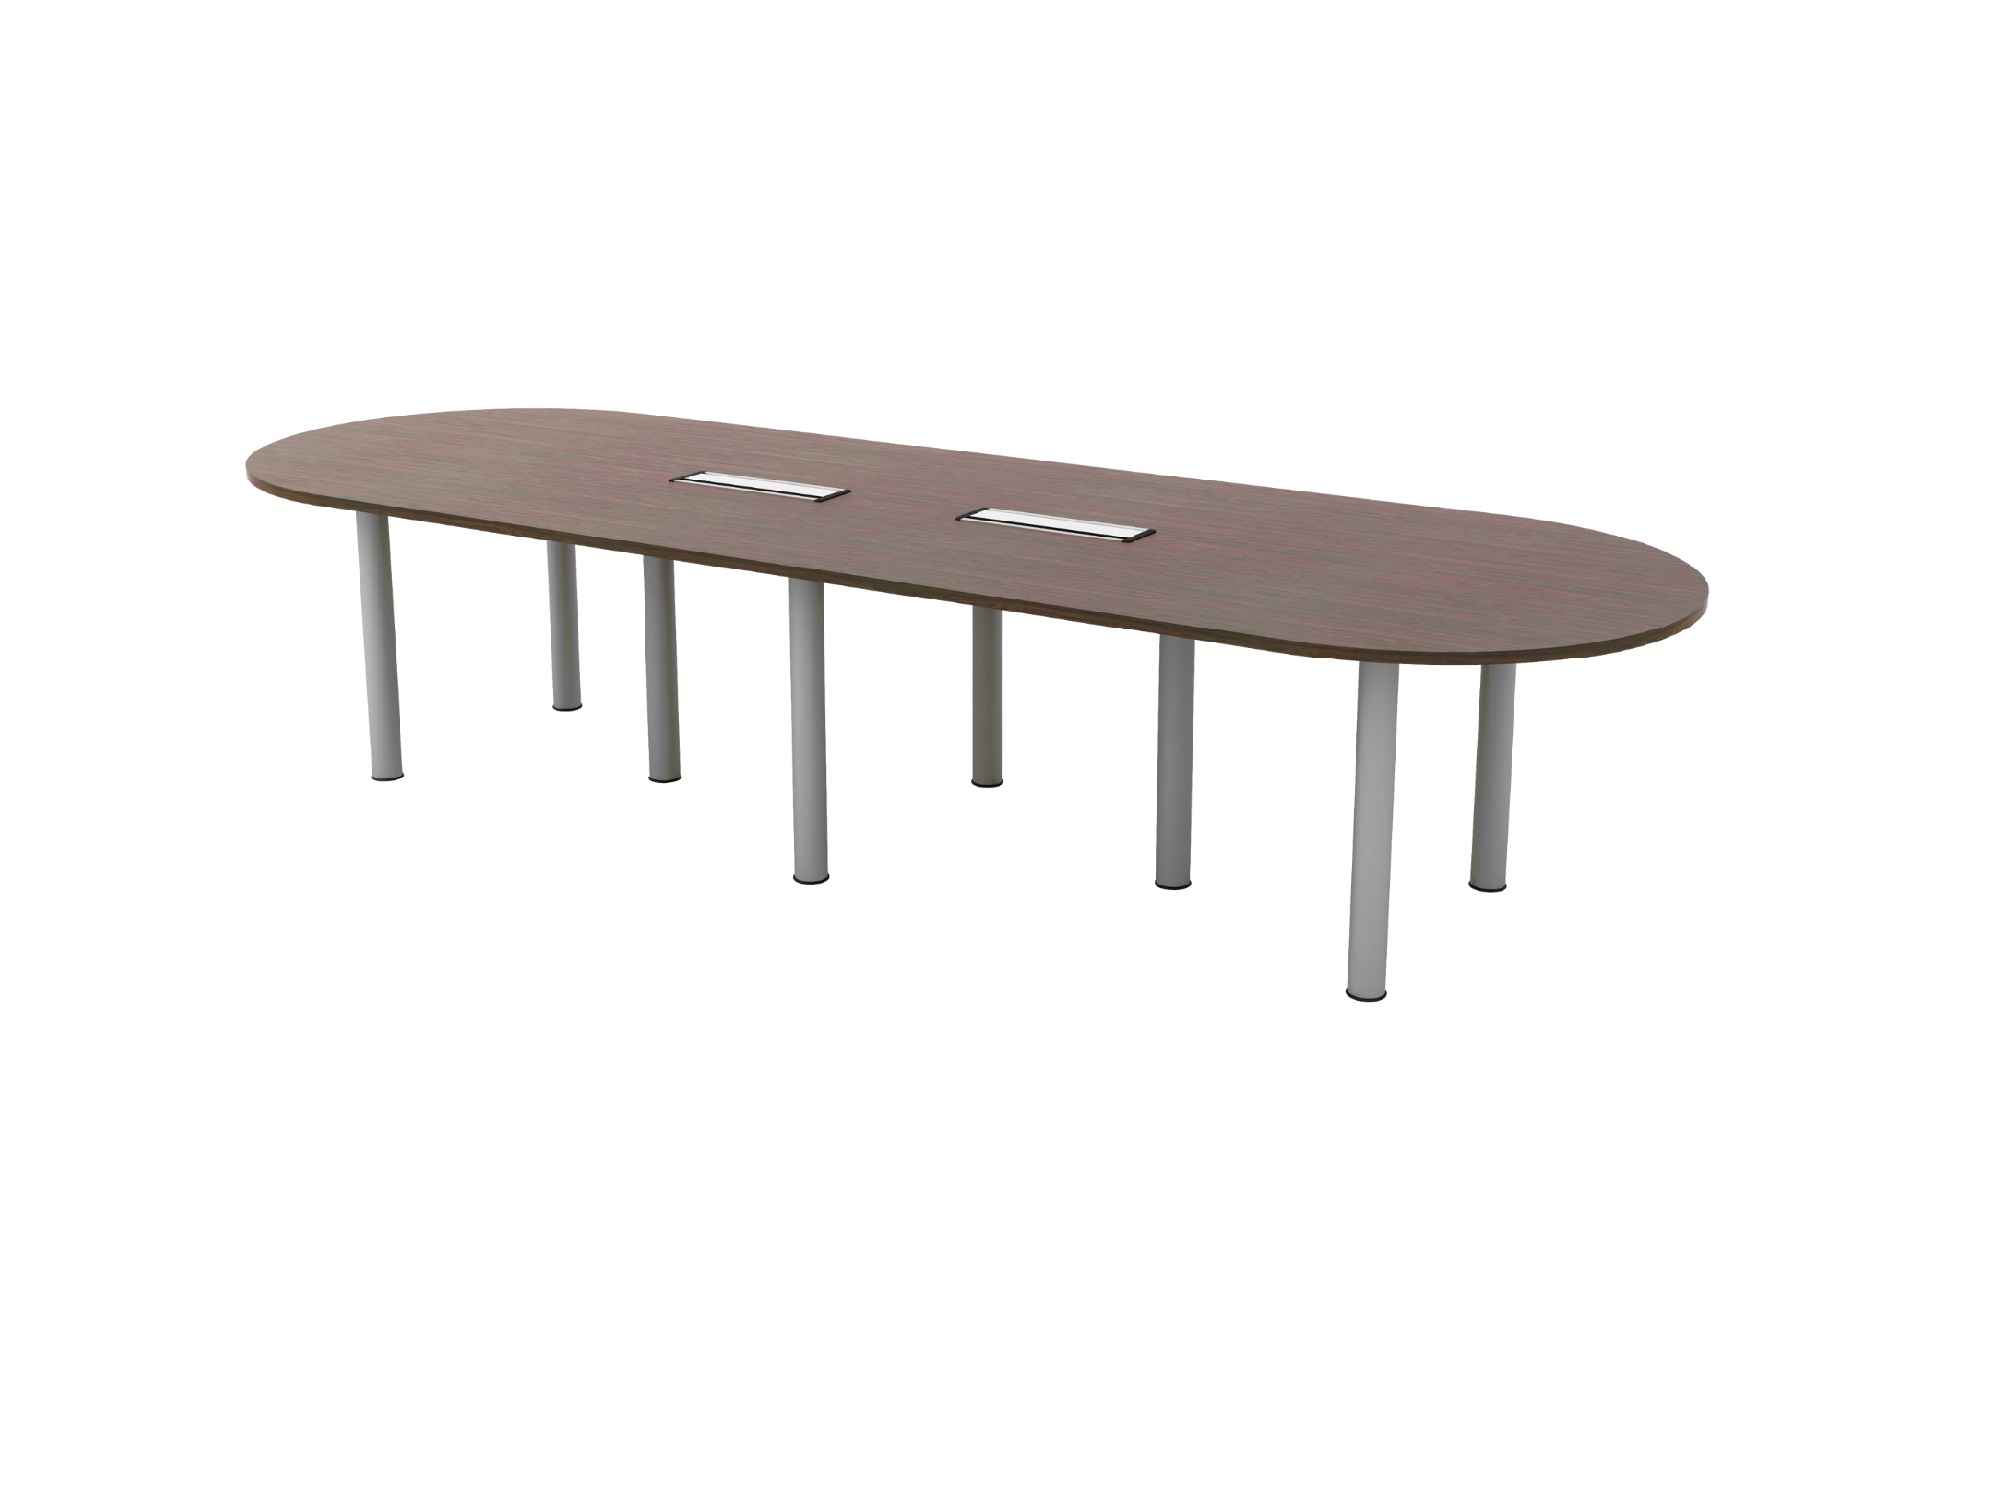 TQIC36 Conference Table Supplier Malaysia TQIC36 Conference Table